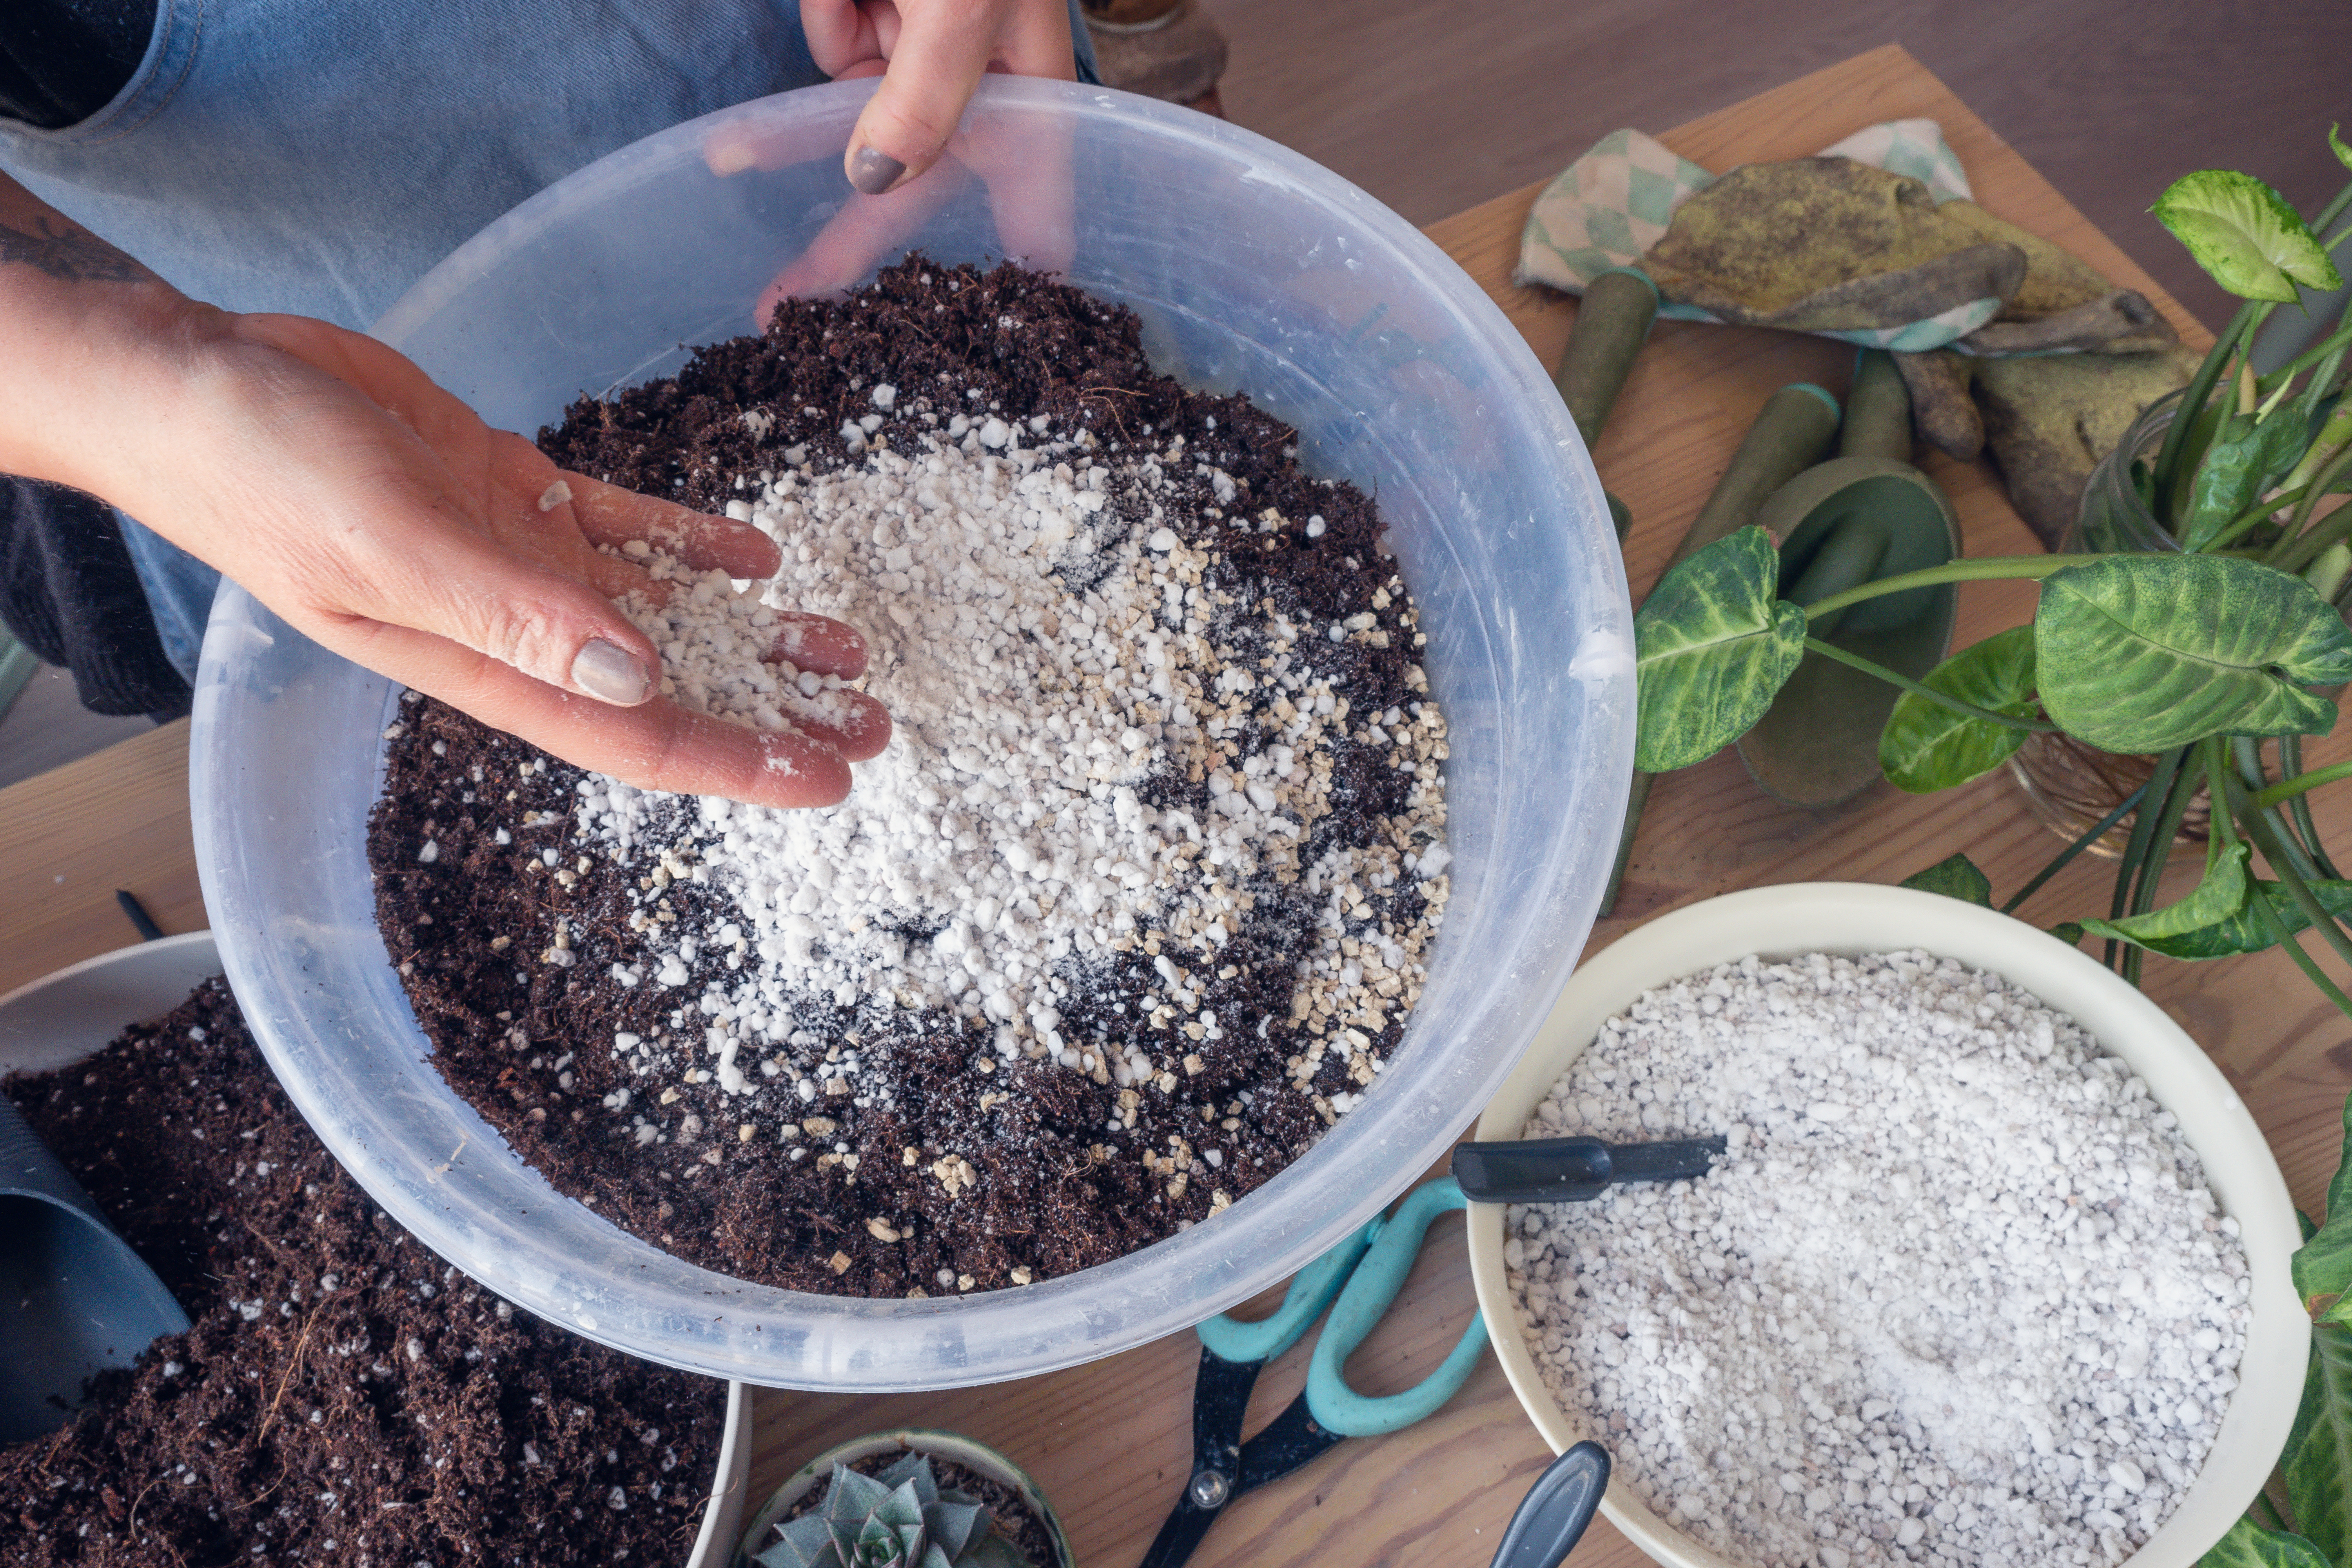 Finding the right soil mix for your house plants with House of Kо̄jо̄ & Planta